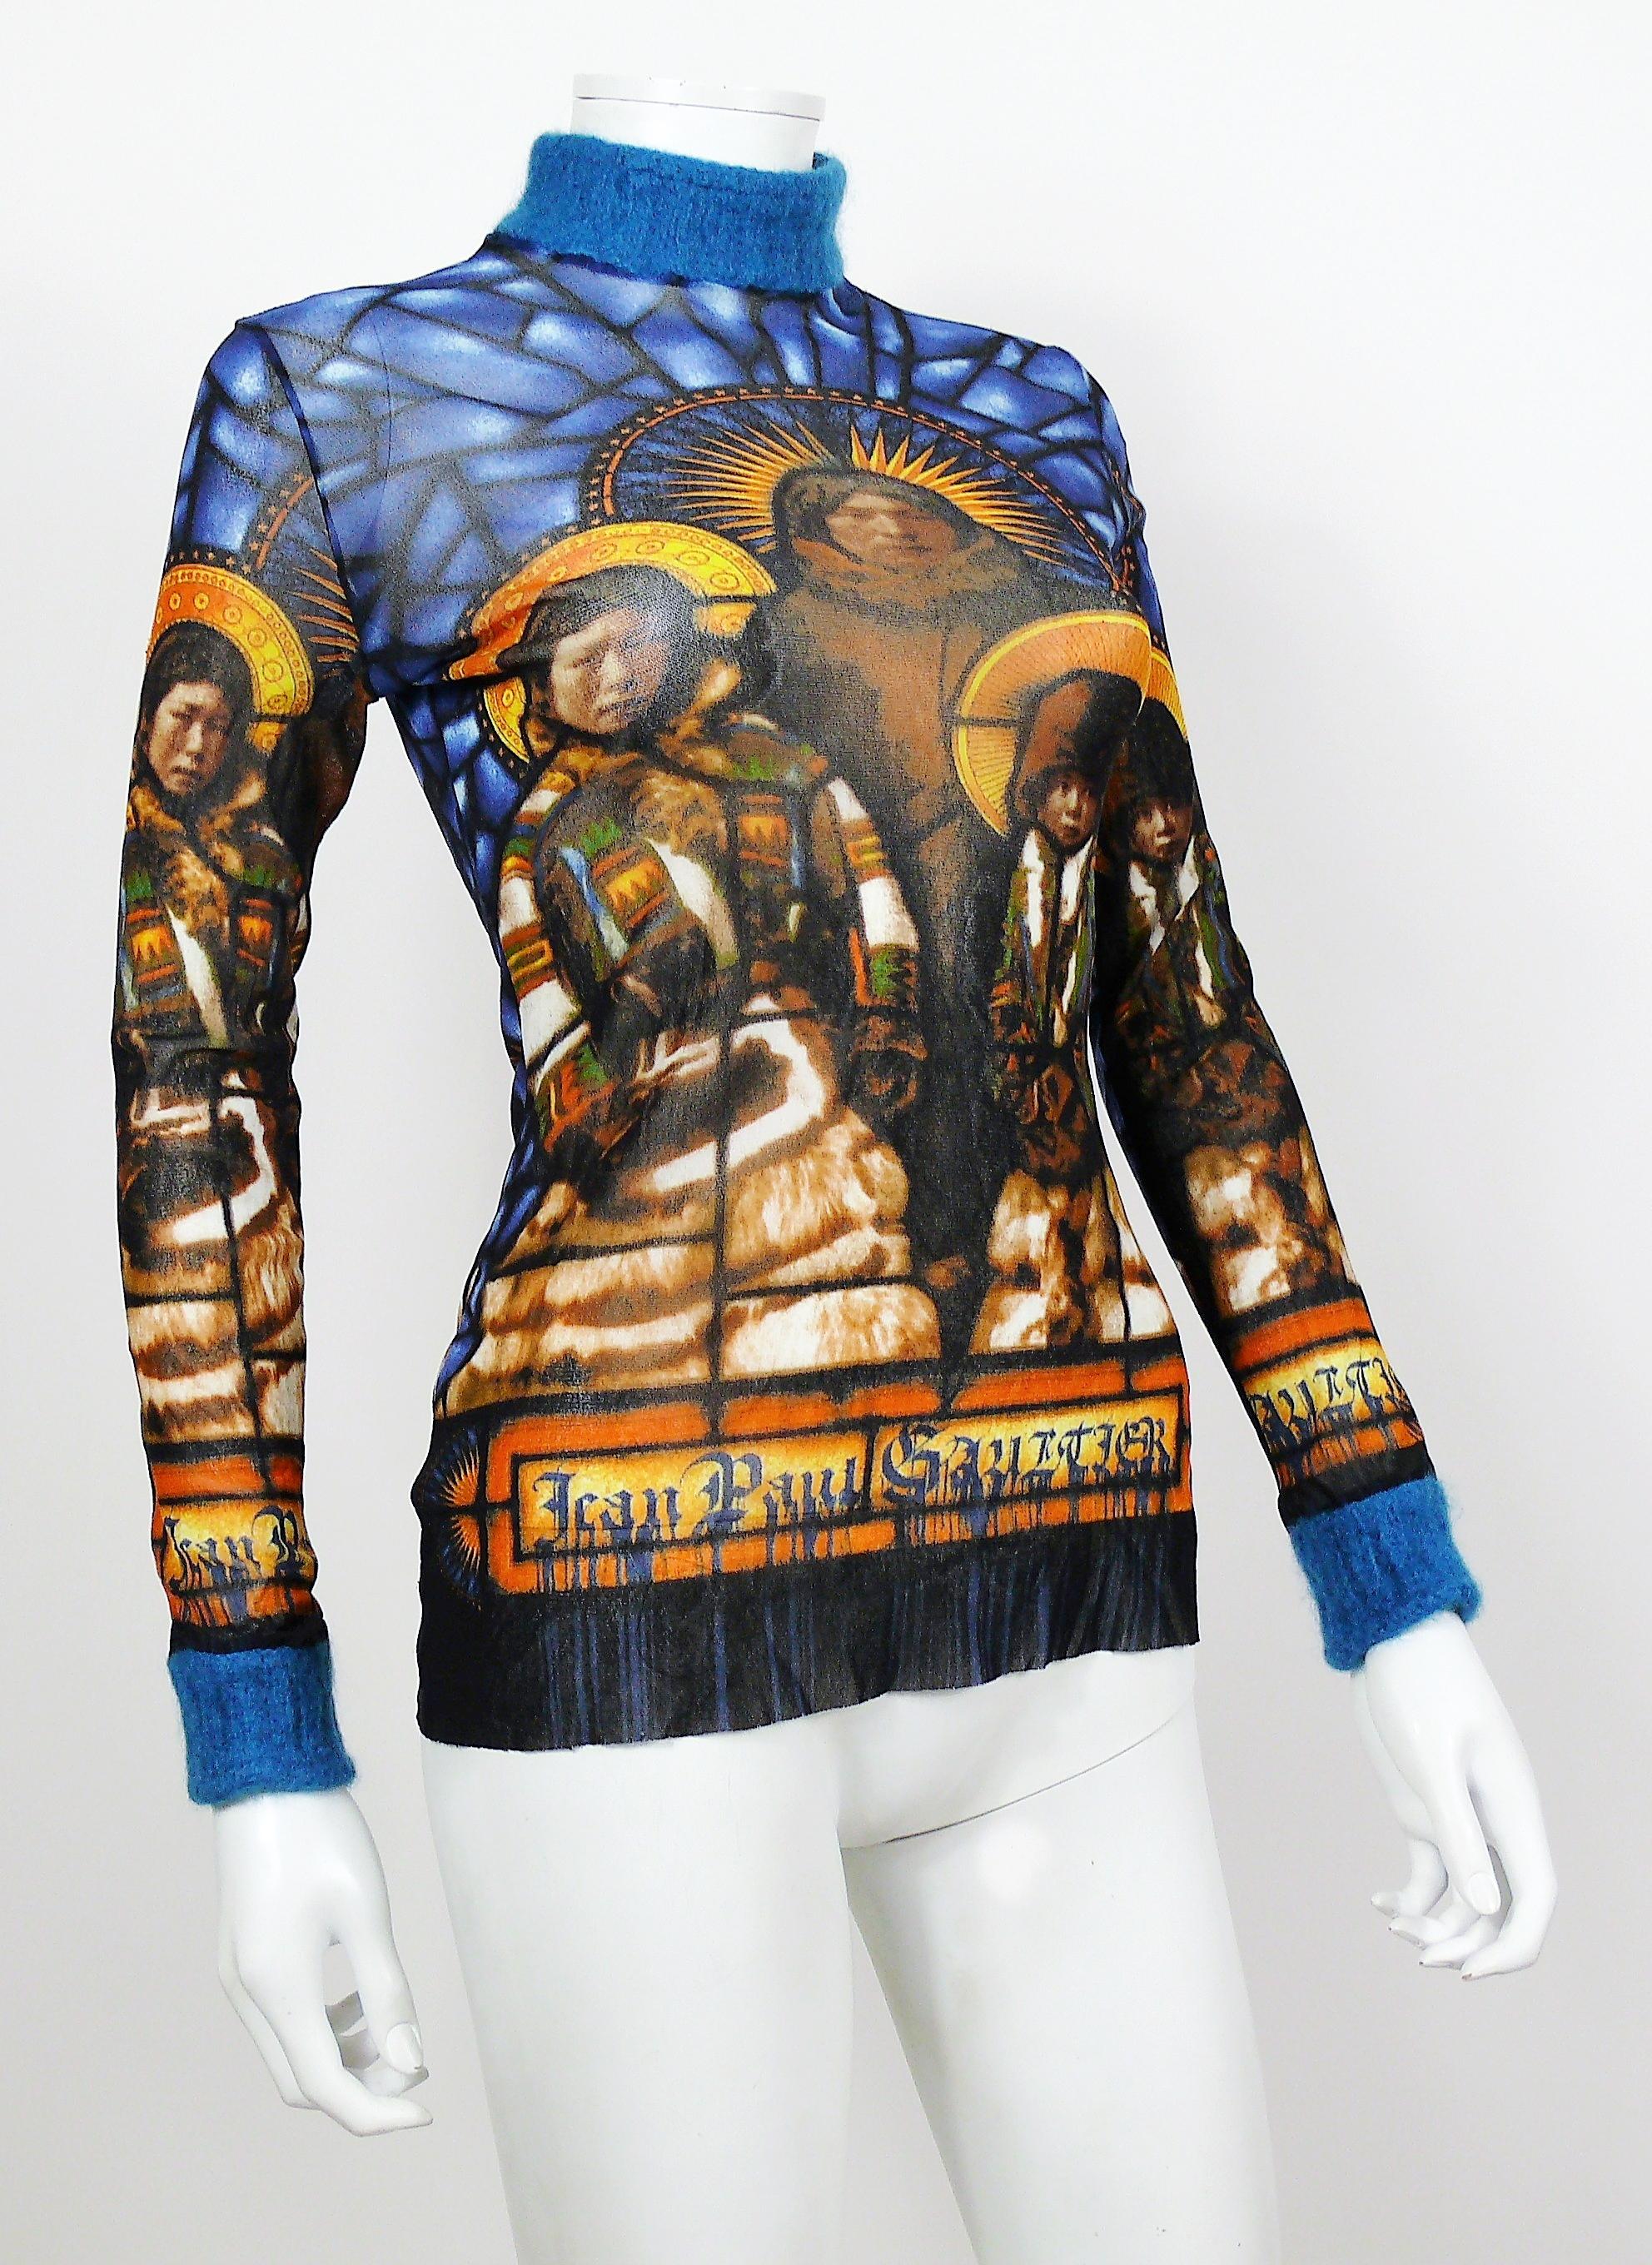 JEAN PAUL GAULTIER vintage sheer mesh top featuring a Native American Holy Family print.

Blue angora like trim on cuffs and neck.

Label reads JEAN PAUL GAULTIER MAILLE CLASSIQUE Paris.
Made in Italy.

Size label reads : L.
Please refer to